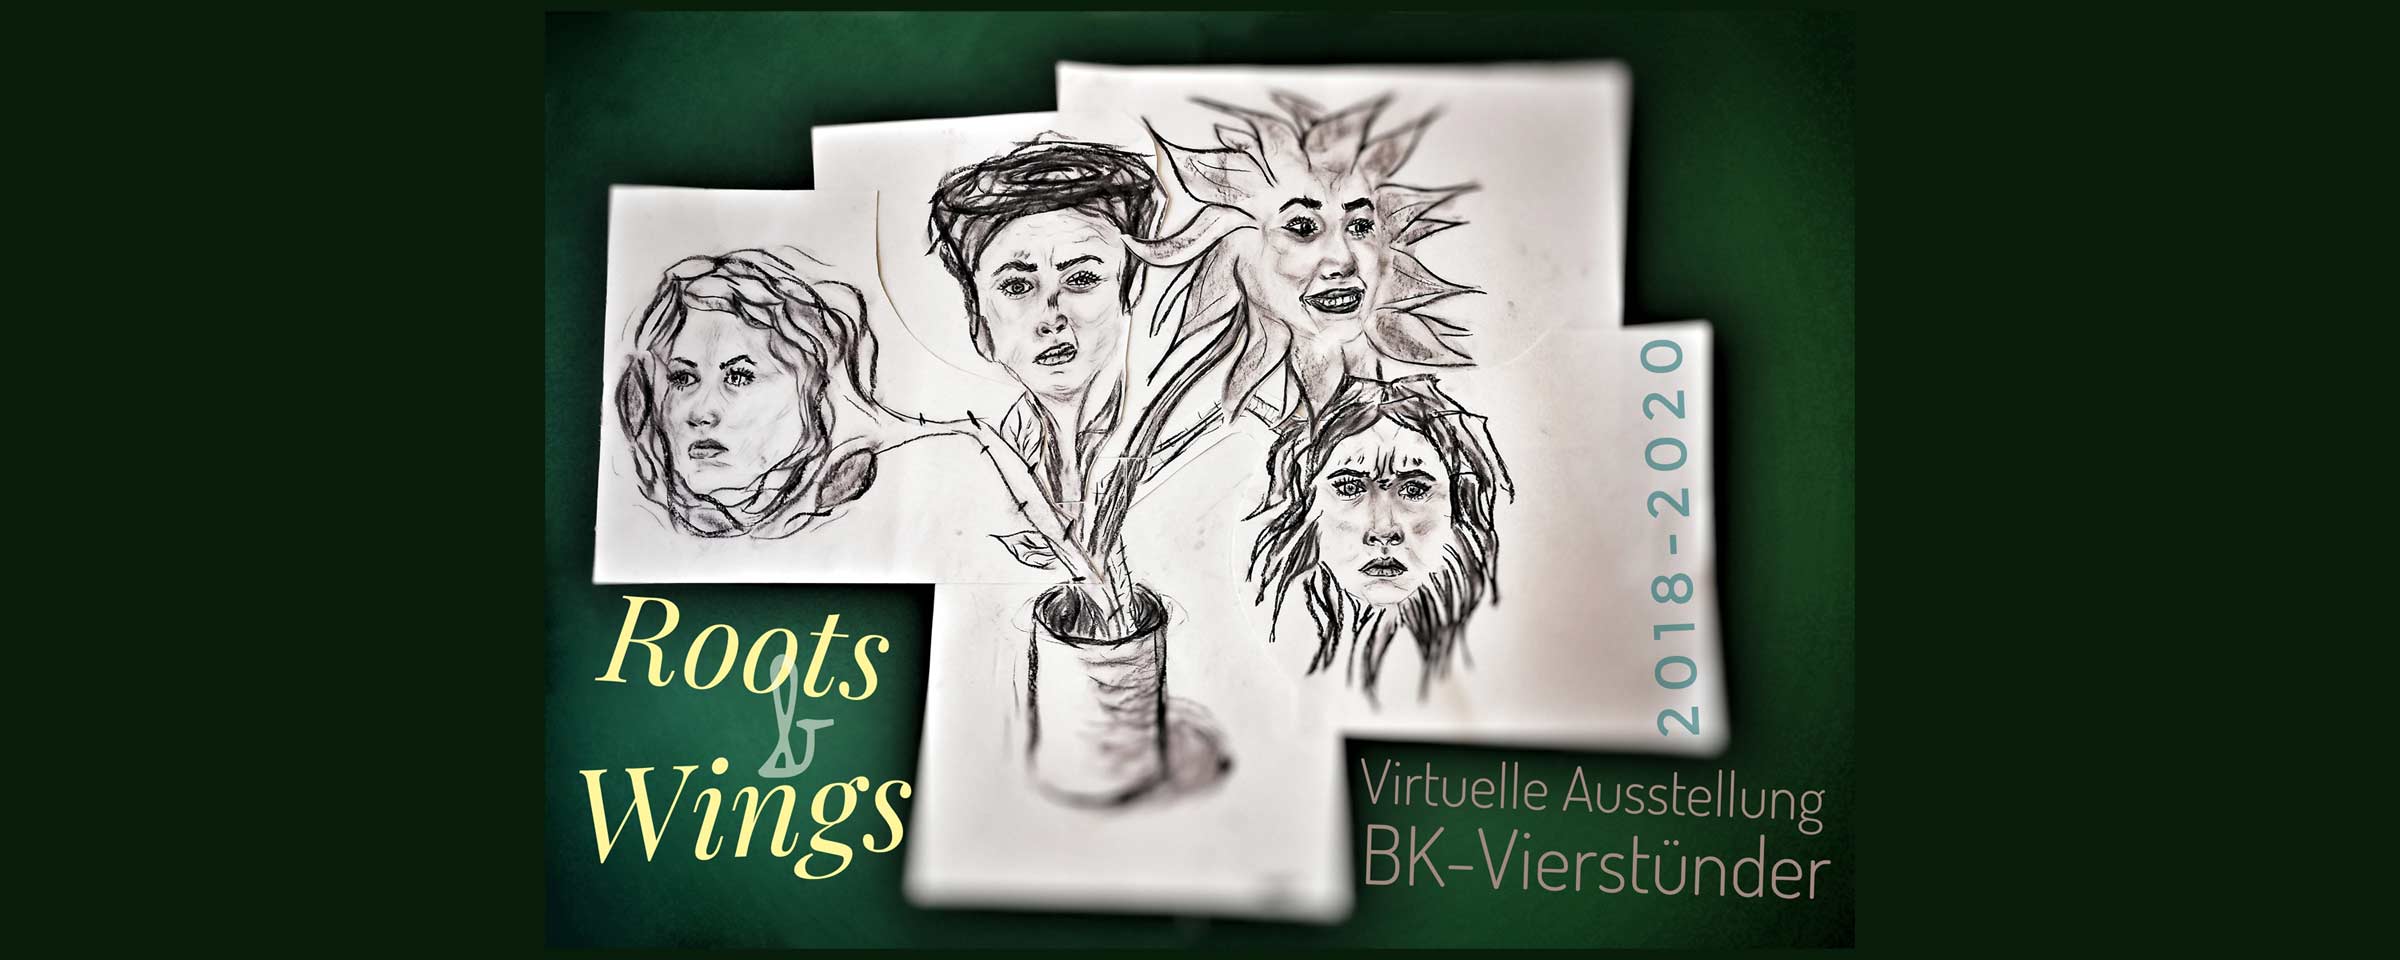 Kunstausstellung Roots and Wings